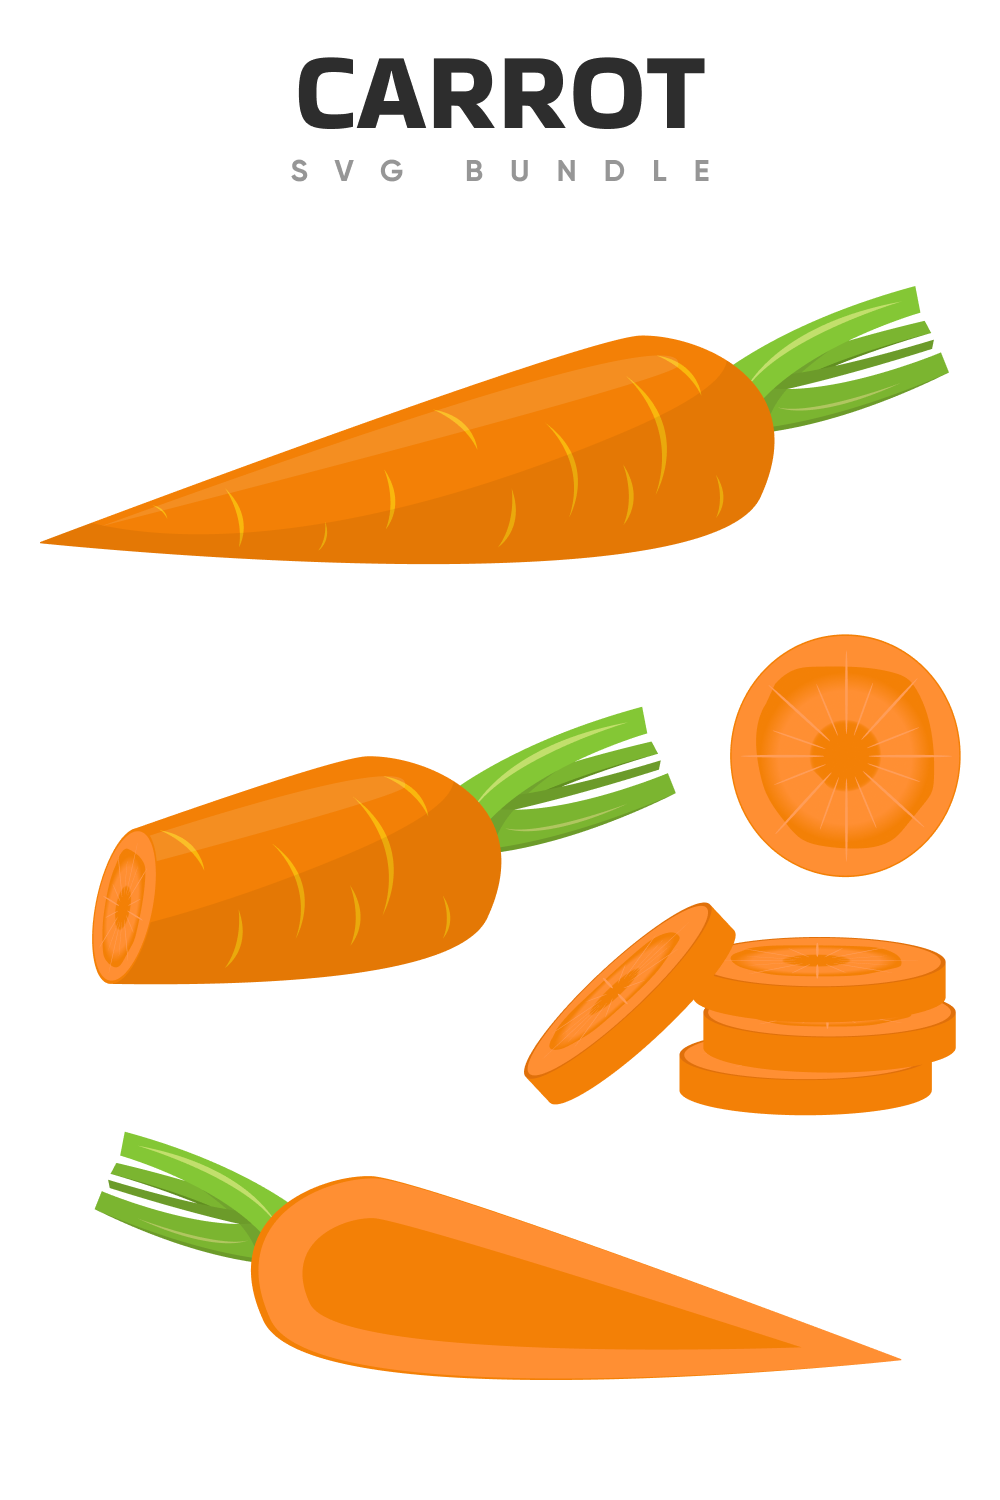 Classic carrot for you.